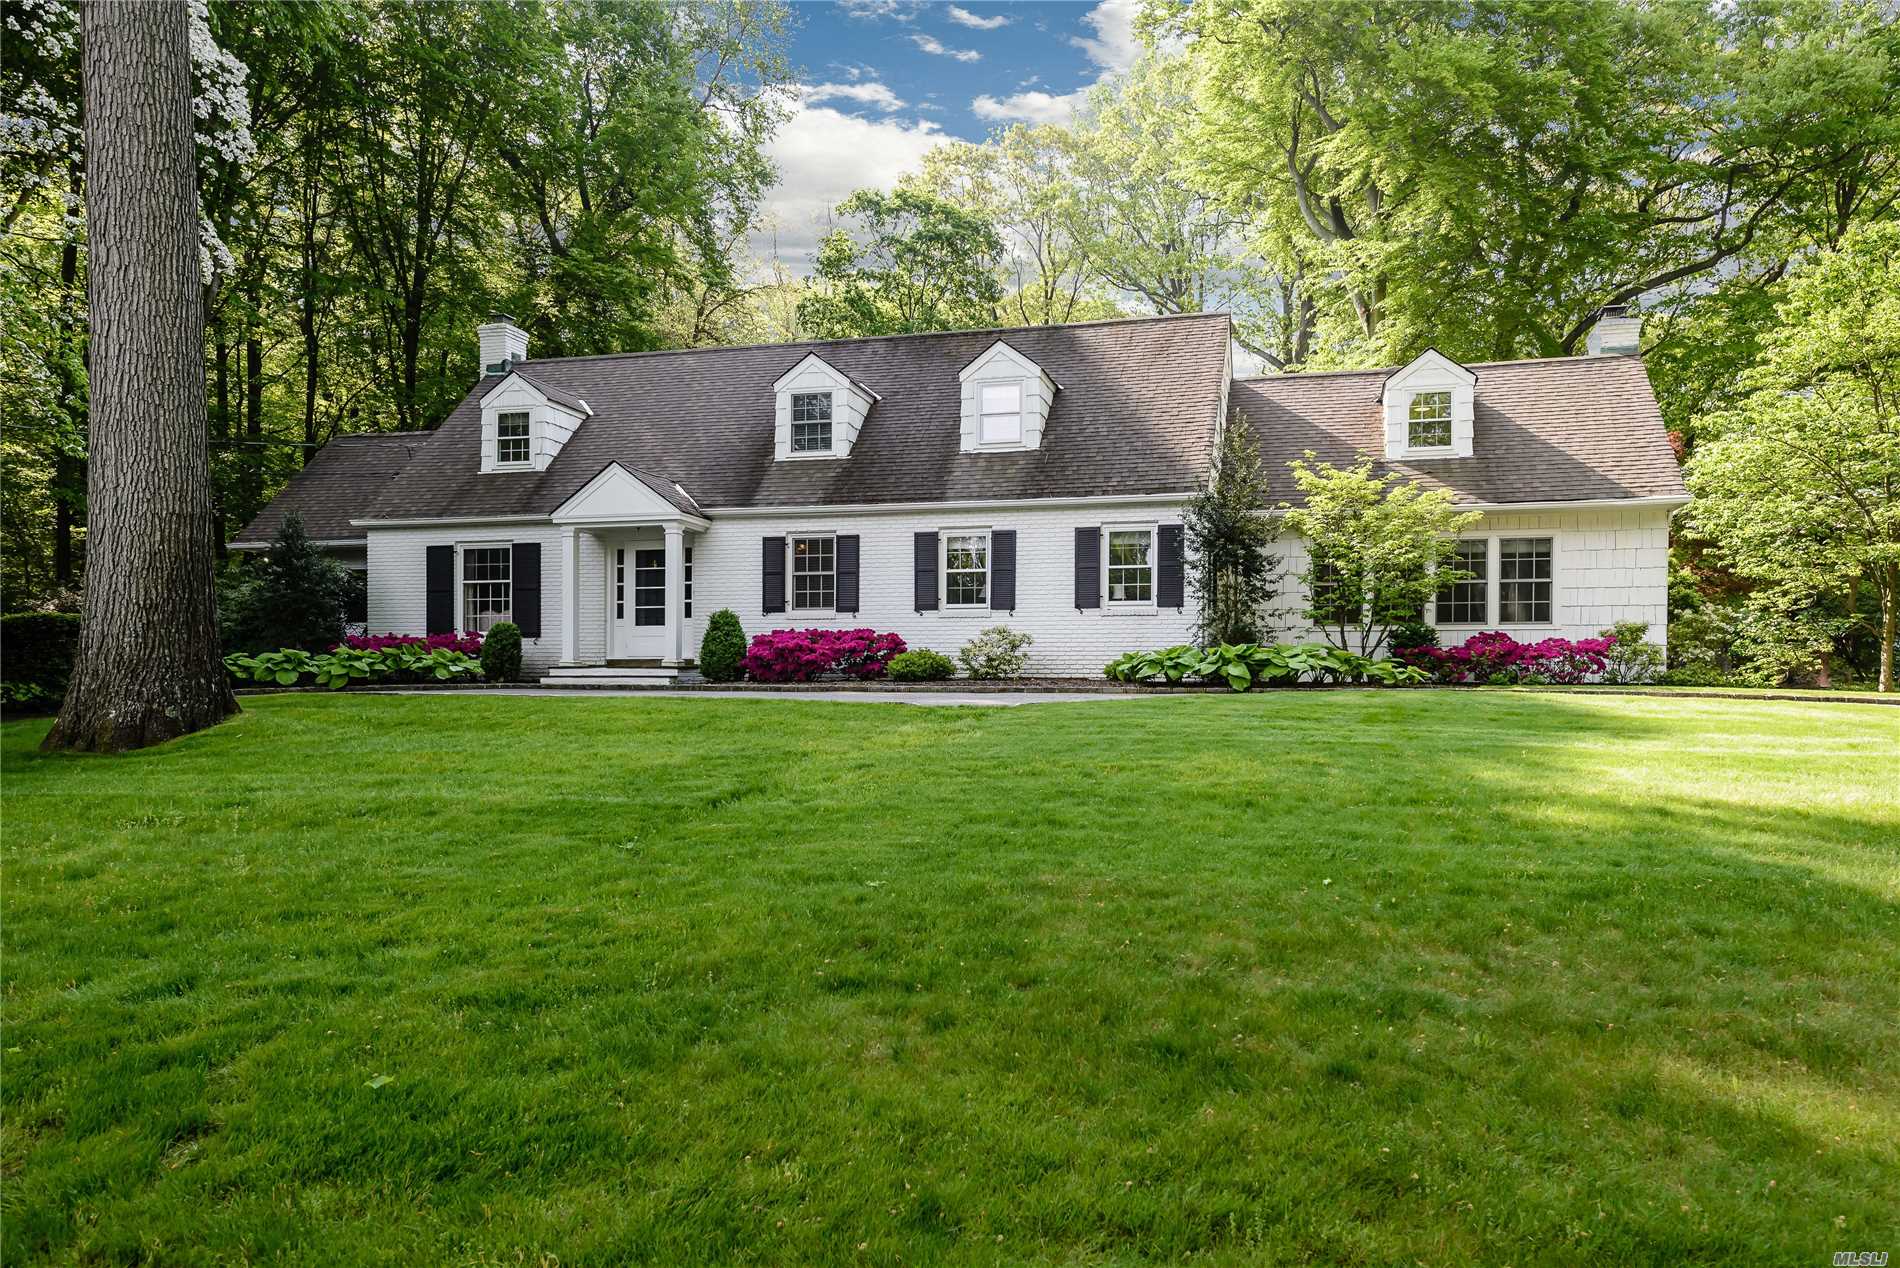 Tucked Away On A Private Cul De Sac Backing Up To Coffin Woods 70 Acre Preserve Sits This Immaculate 5 Bedroom Colonial On 2+ Acres. Built In 1959, House Is Fully Updated With New Kitchen, Large Dr, Spacious Lvrm/Fpl And Cozy Den. Guest Bedroom On Main Floor. Full House Generator. Lovely Gardens